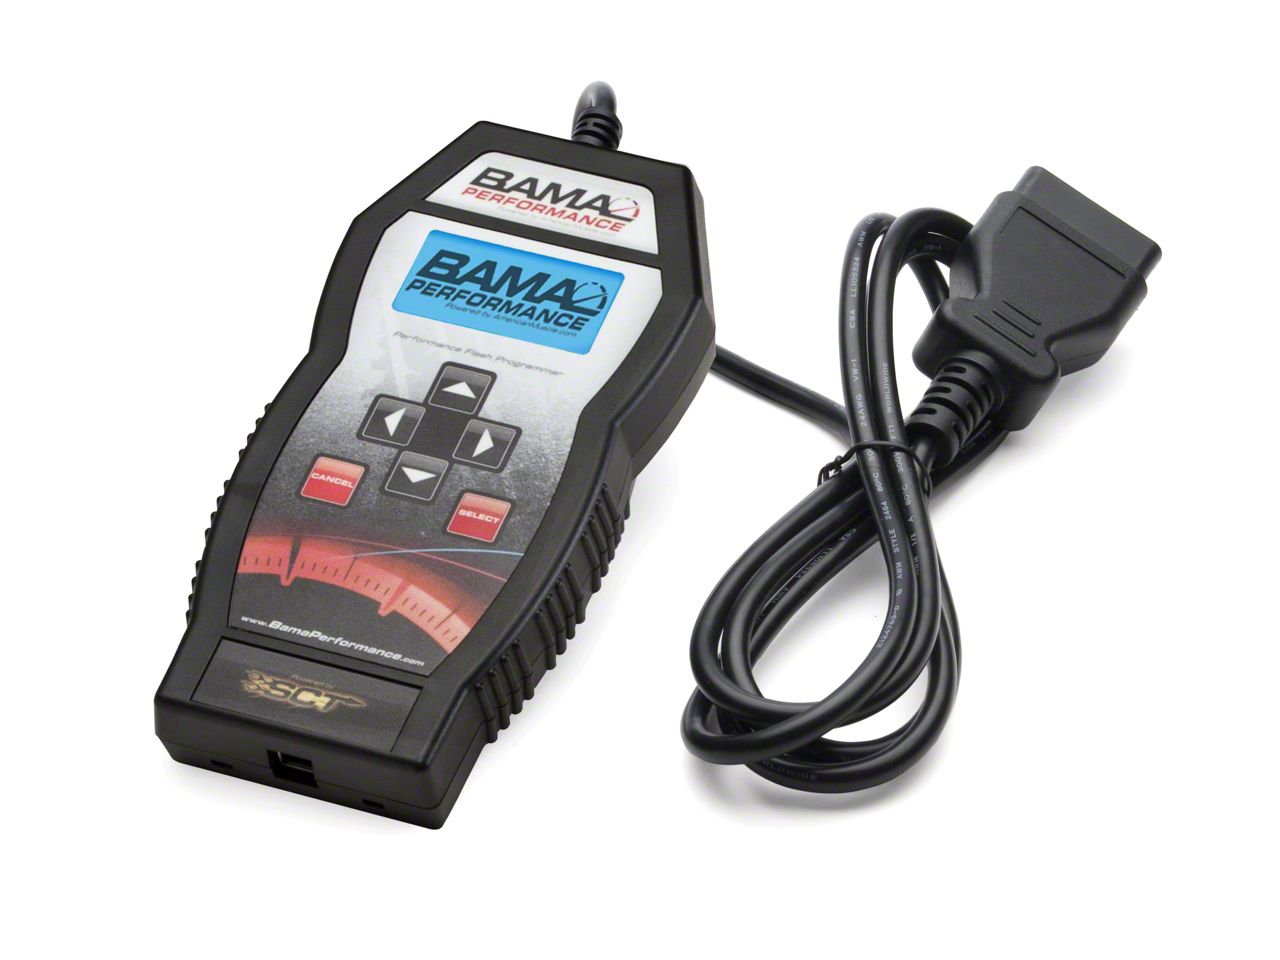 Sct sf3 power flash ford programmer price #3